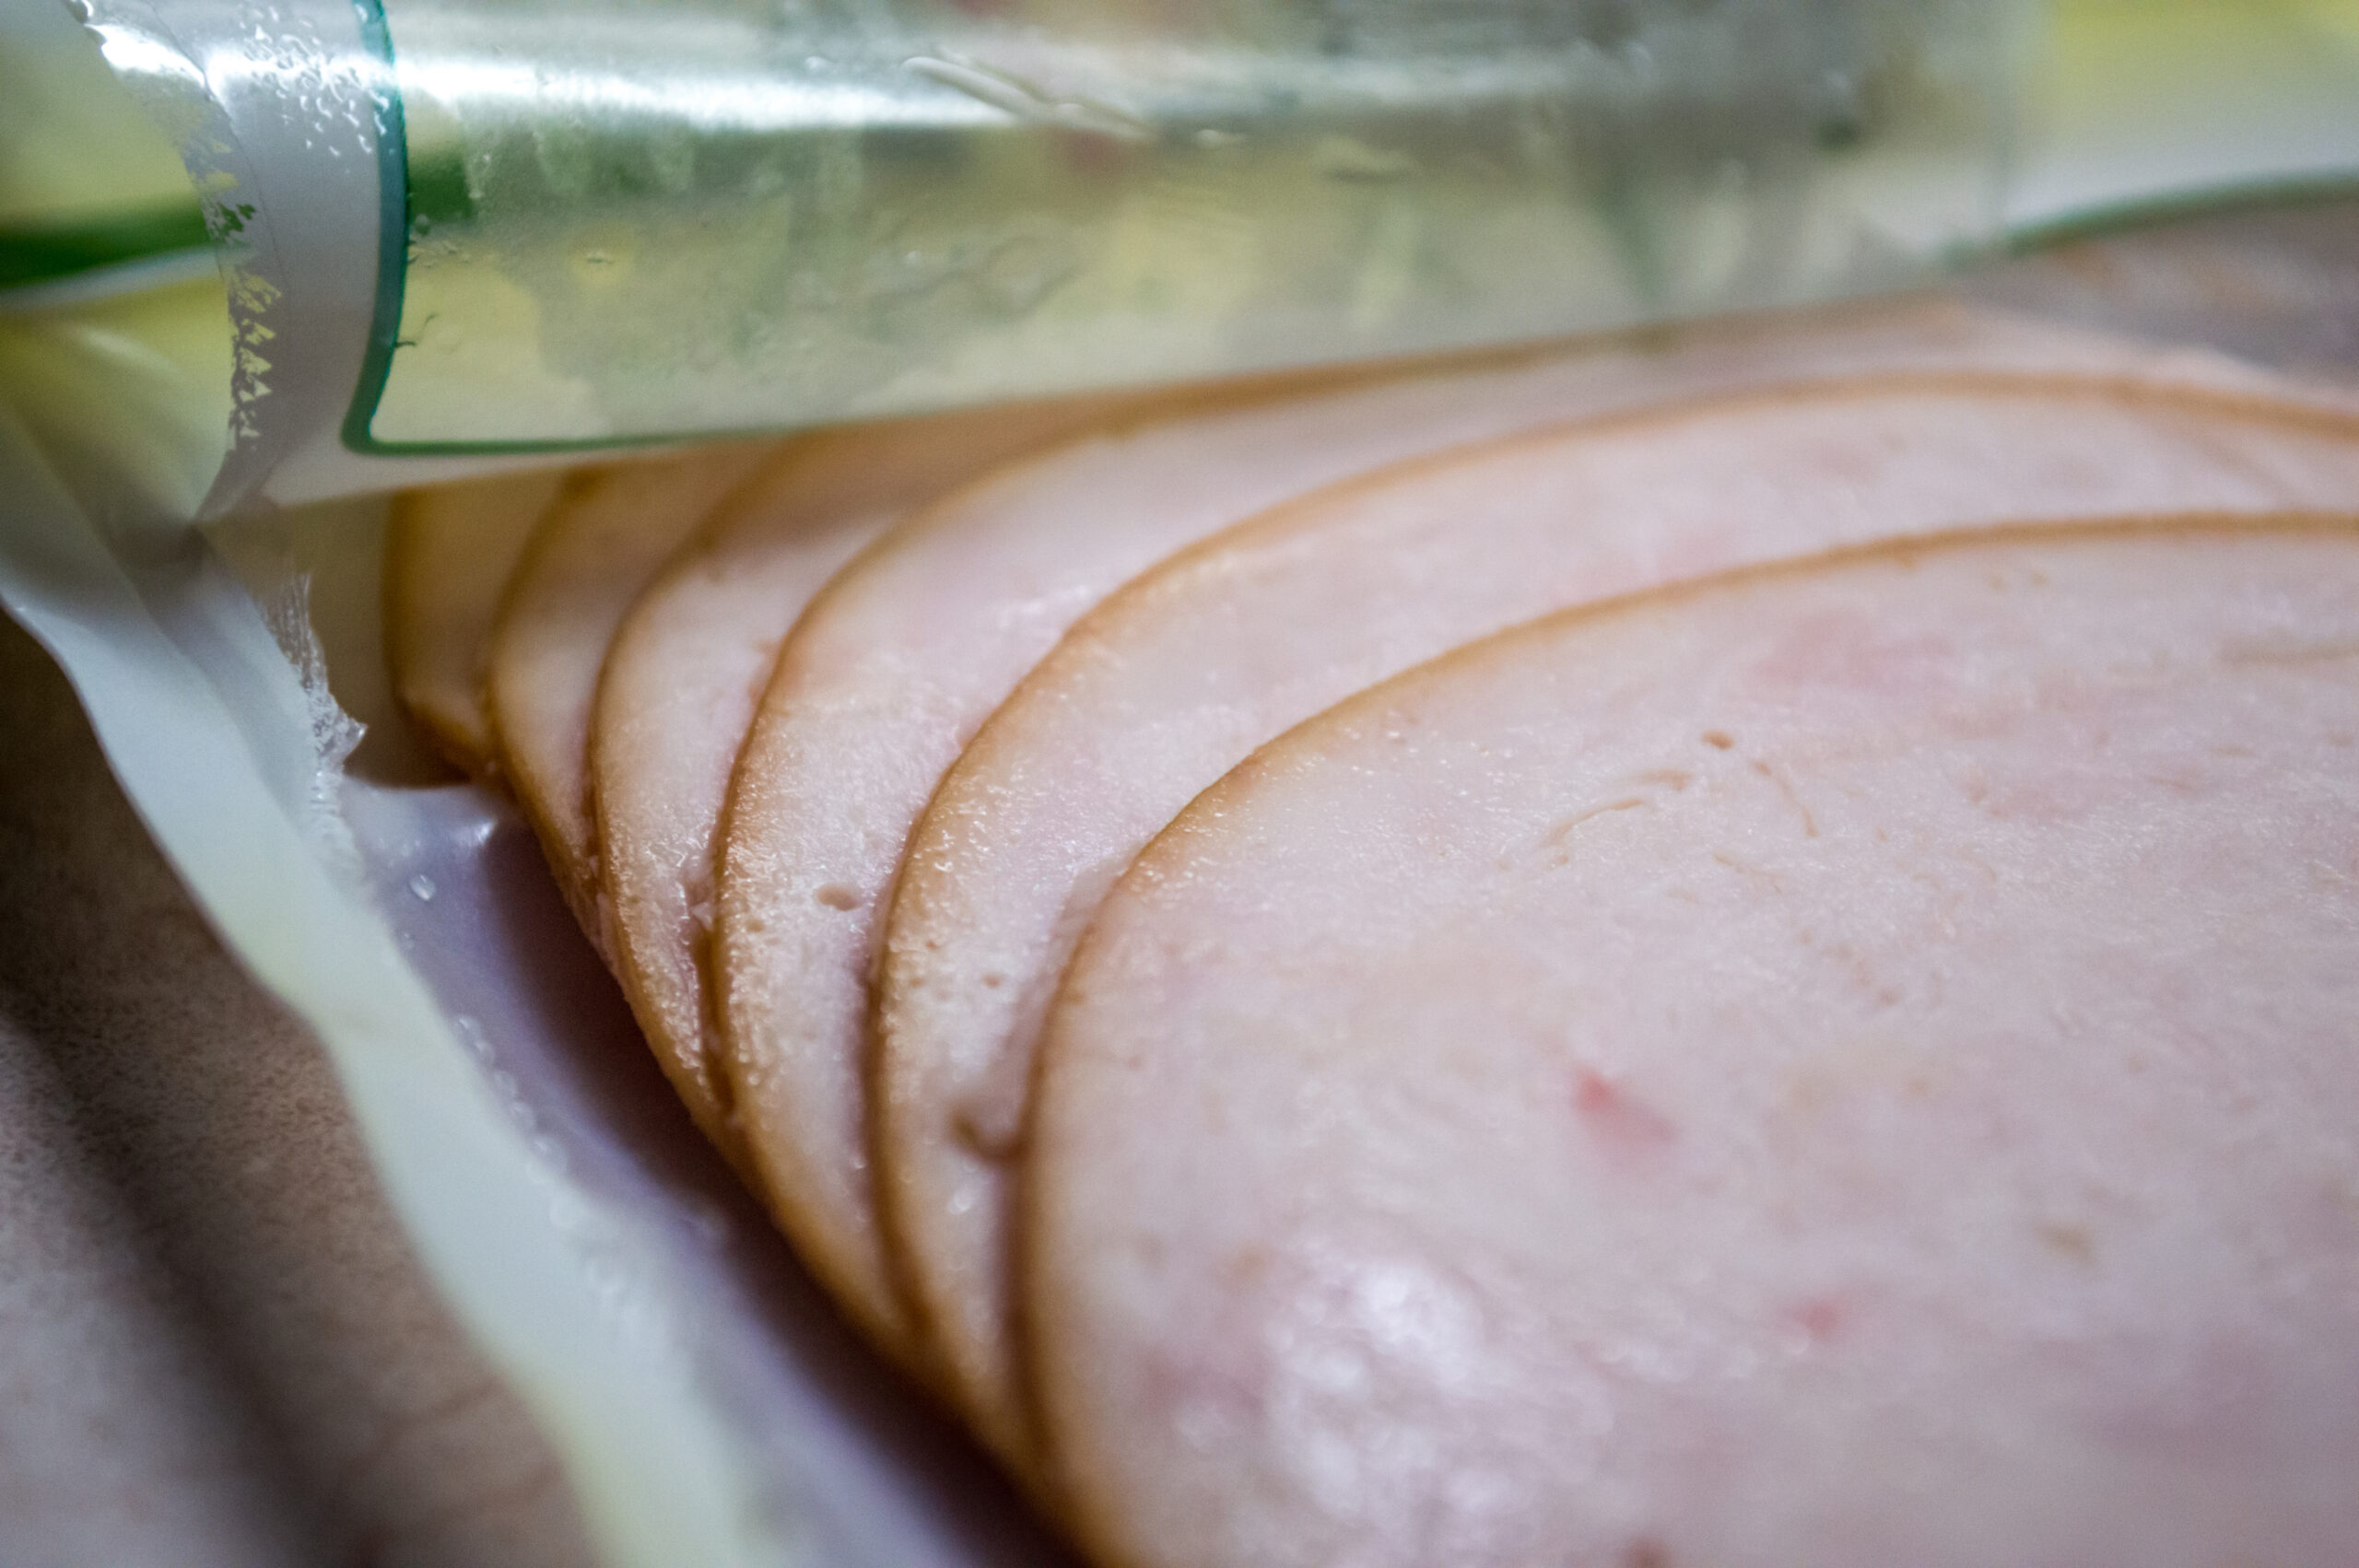 A close up image of some deli-style turkey slices, a healthy sandwich filler.